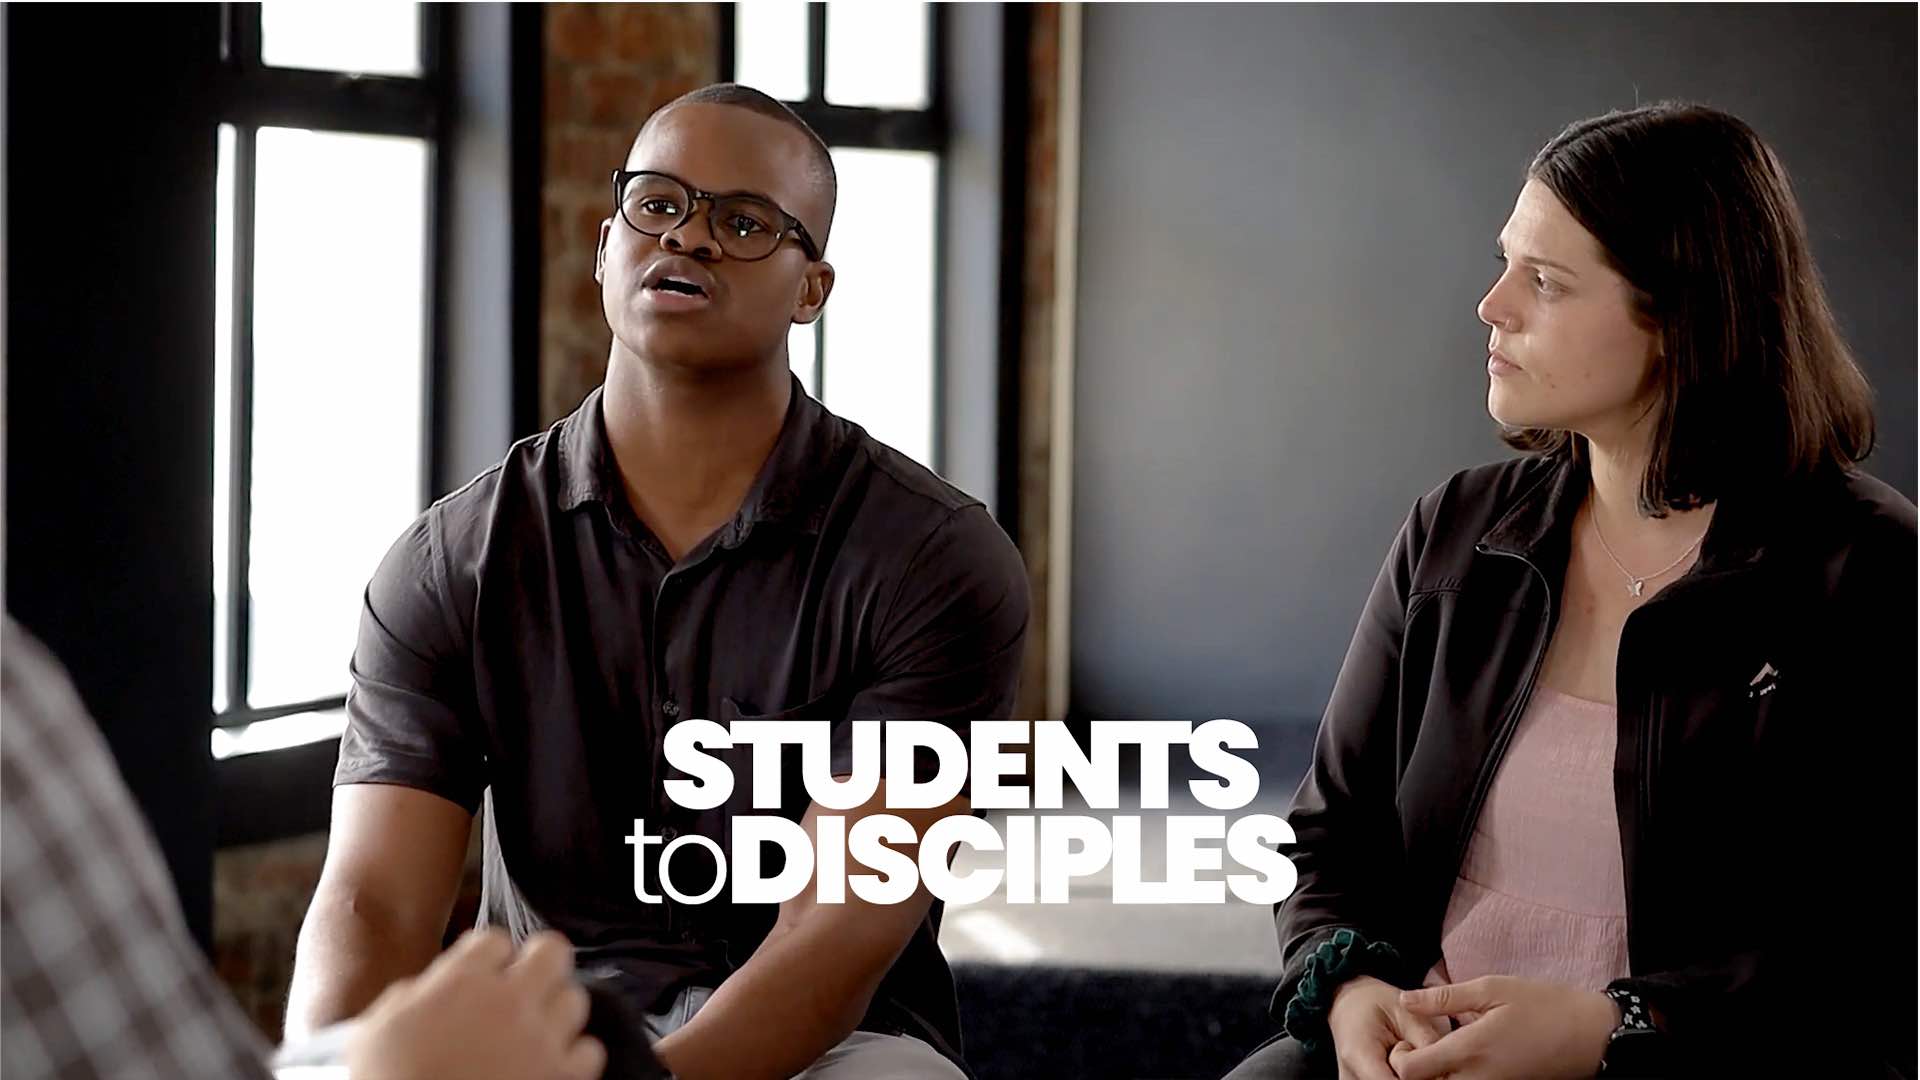 Video image for session 7 of Ins and Outs of Community Leading on discipling students.